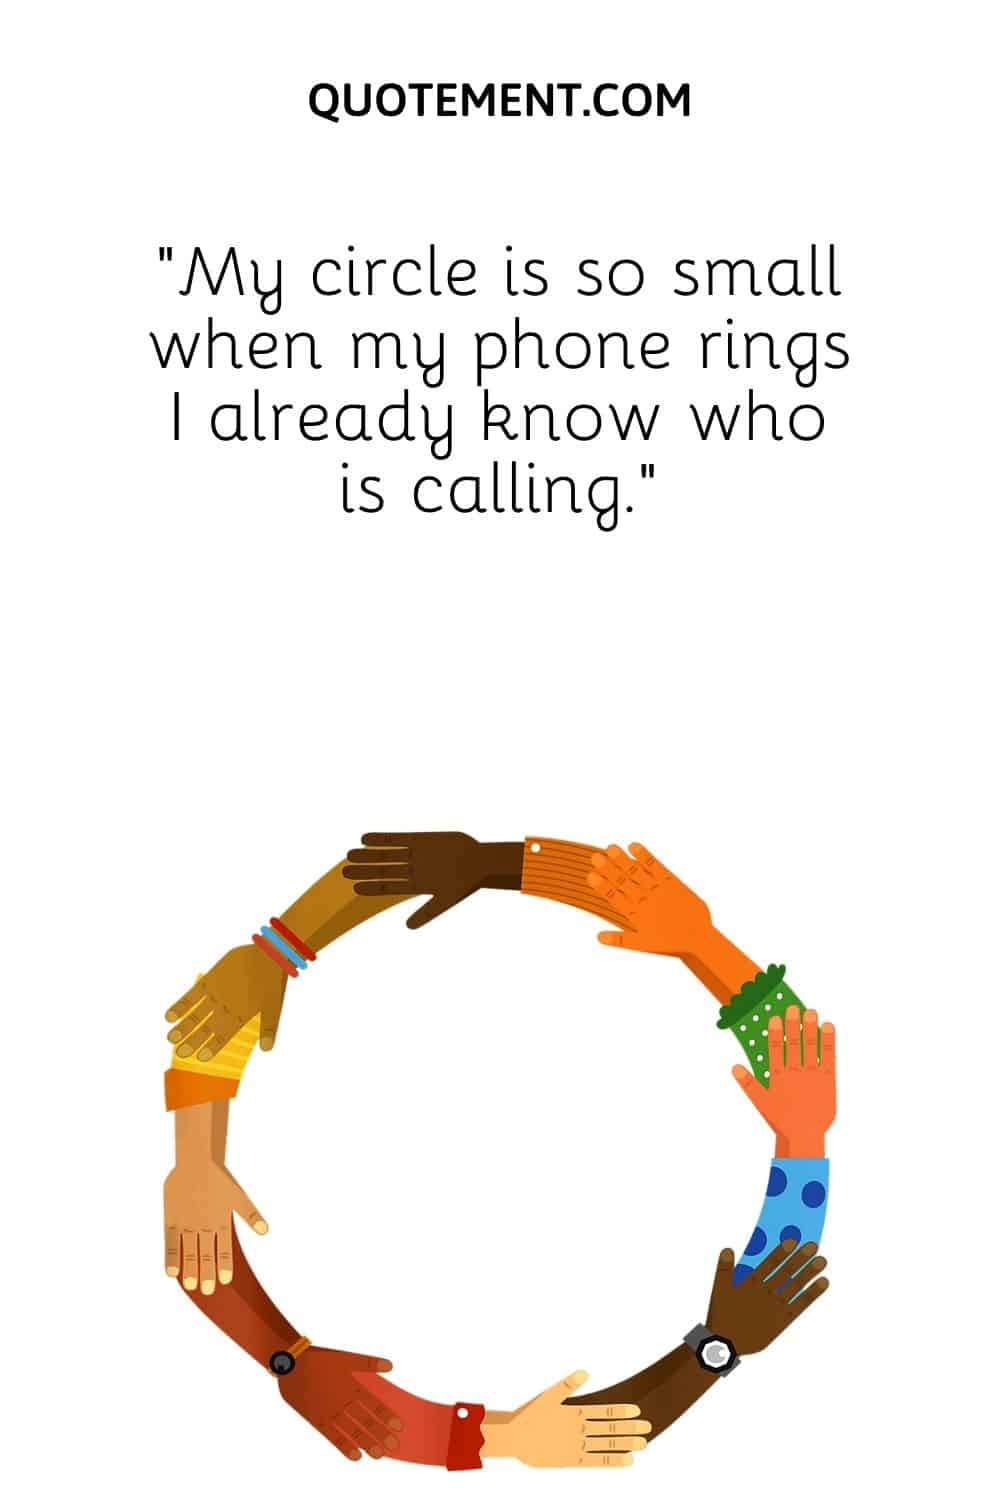 “My circle is so small when my phone rings I already know who is calling.”